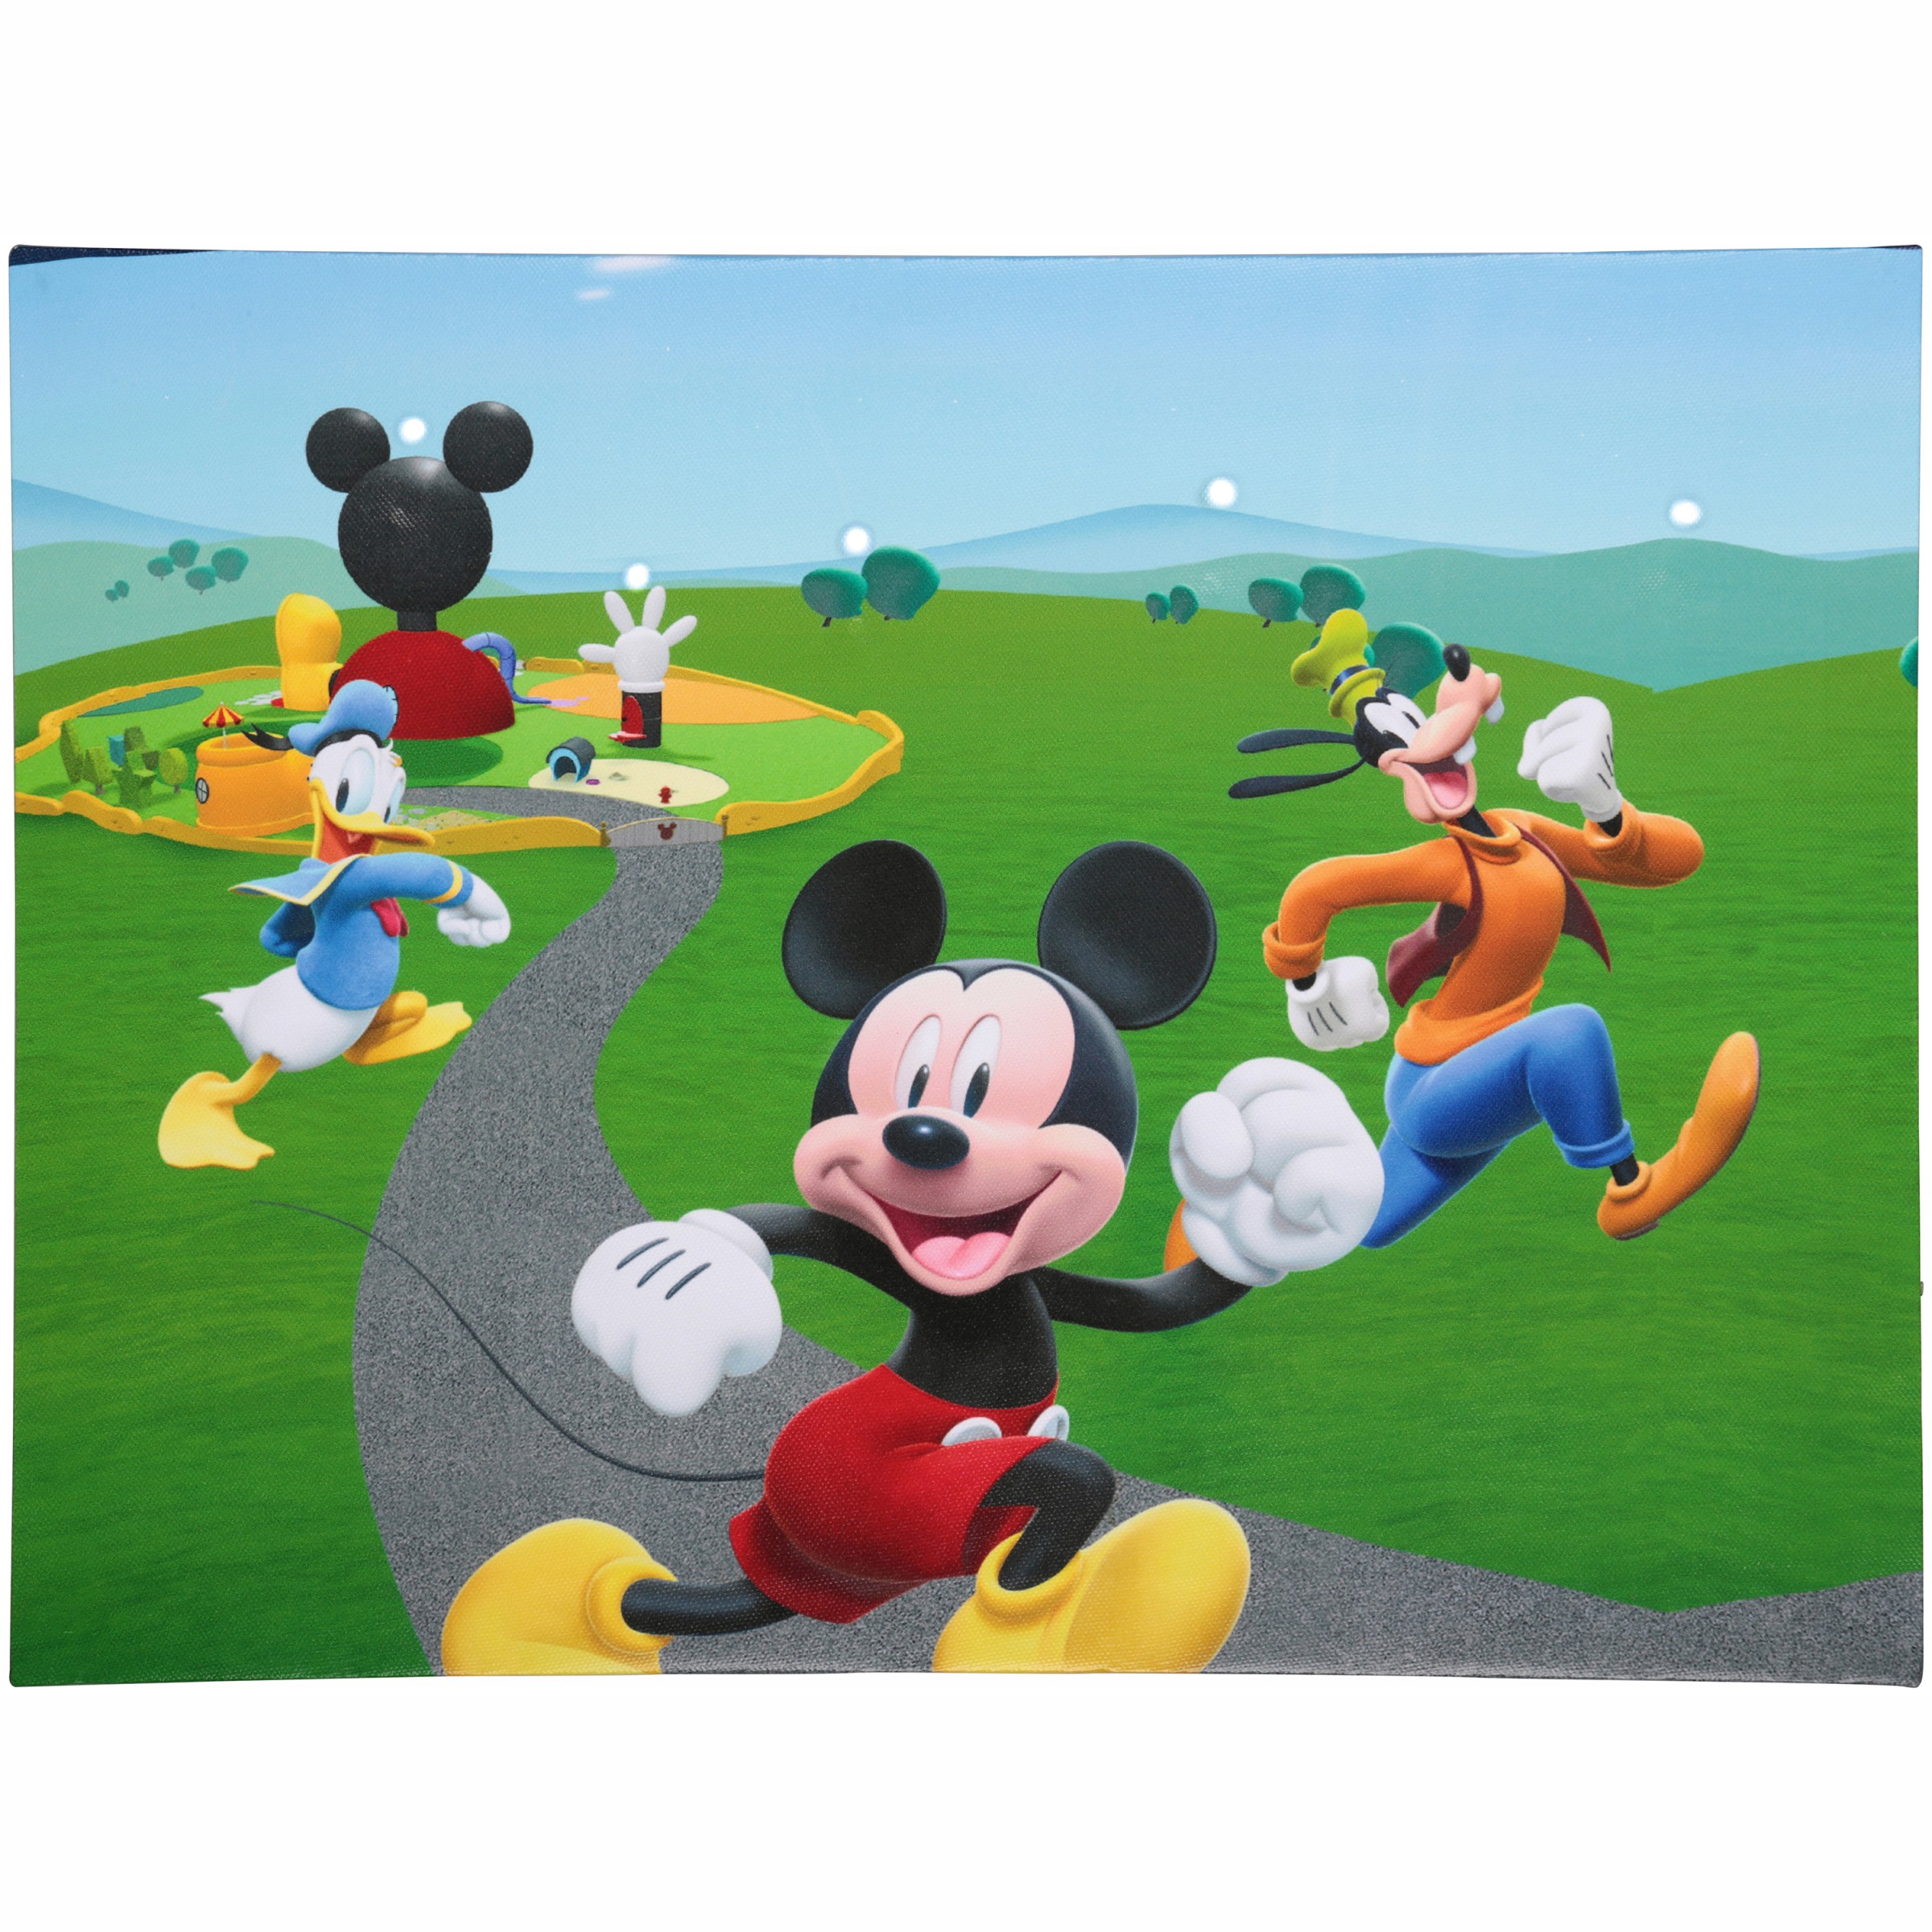 Mickey Mouse Birthday Party Decor Disney Inspired Lawn Art Table decor Mick...